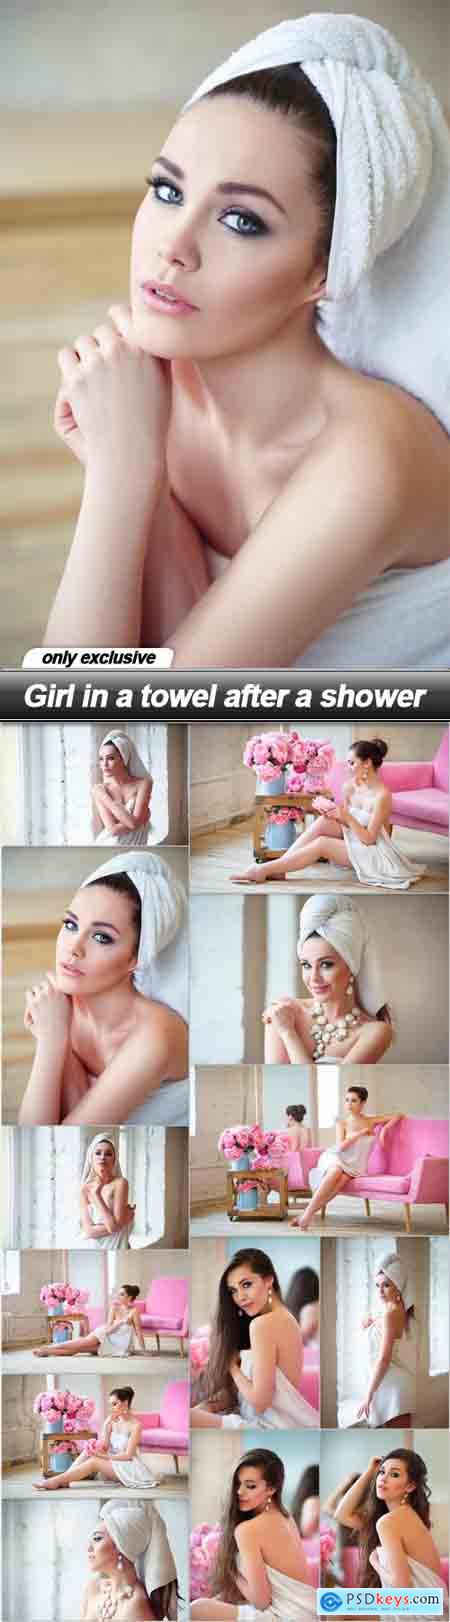 Girl in a towel after a shower - 13 UHQ JPEG